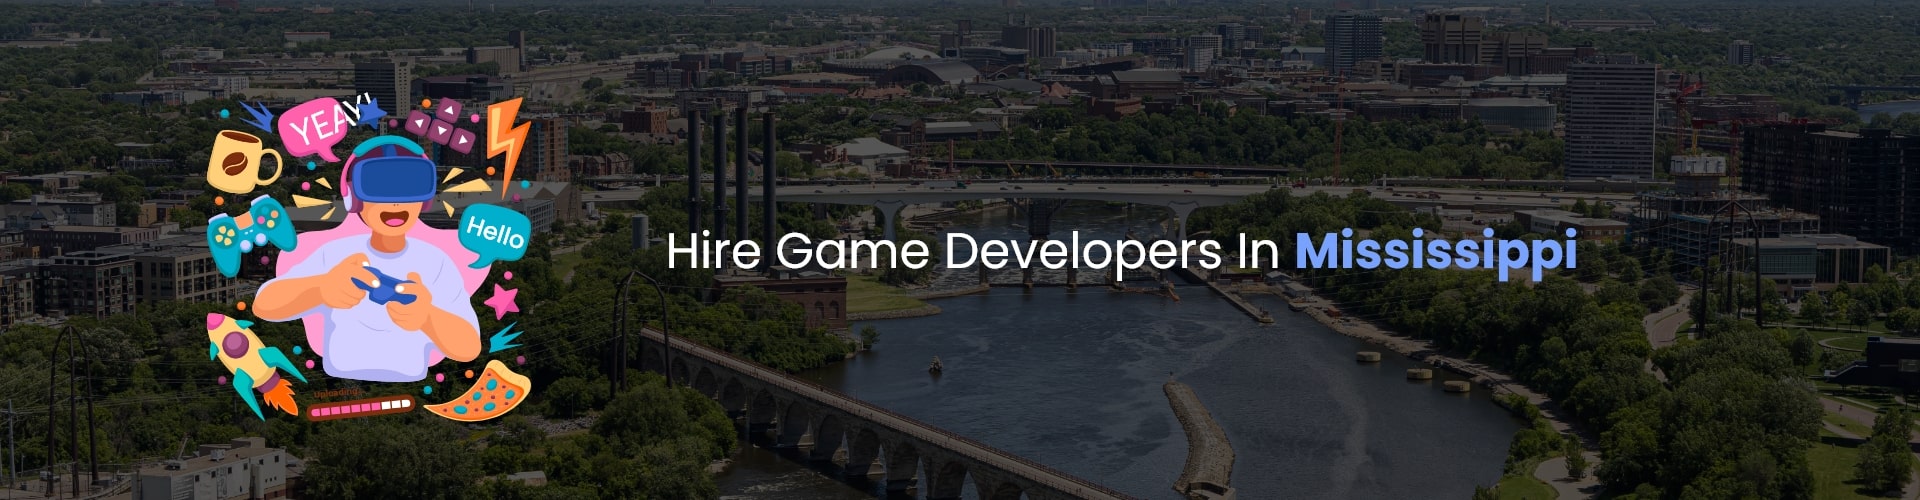 hire game developers in mississippi